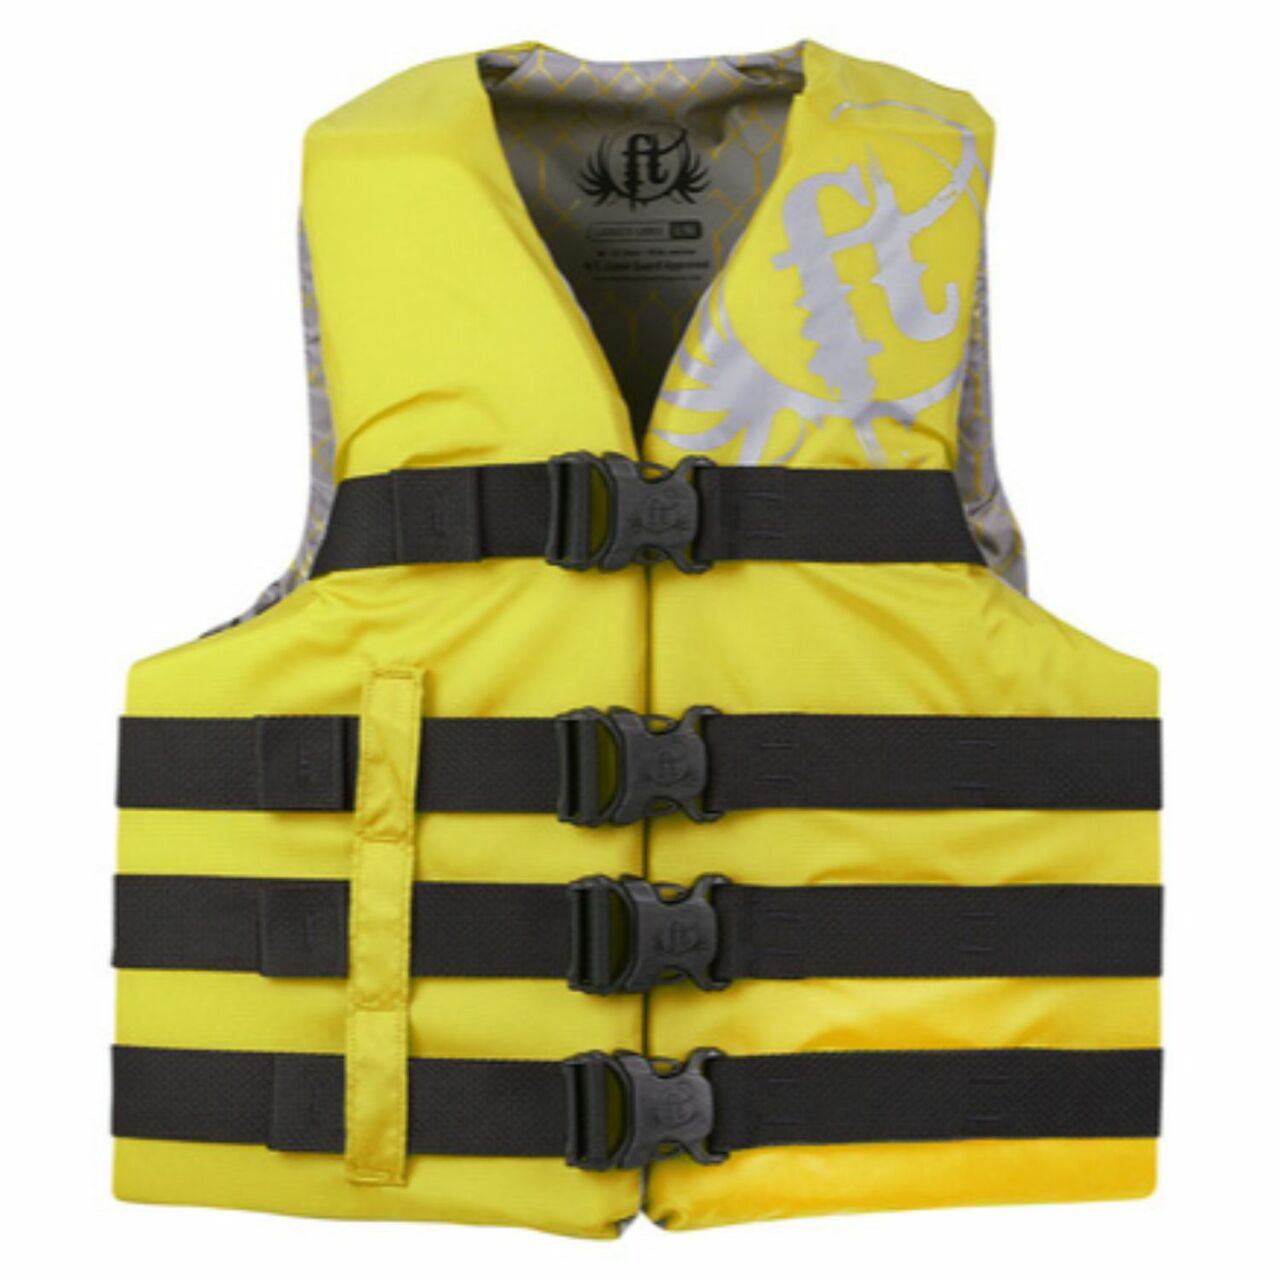 Full Throttle 112200-300-050-19 Adult Dual-Sized Nylon Water Sports Vest - Large/XL (40"-52" Chest), Yellow